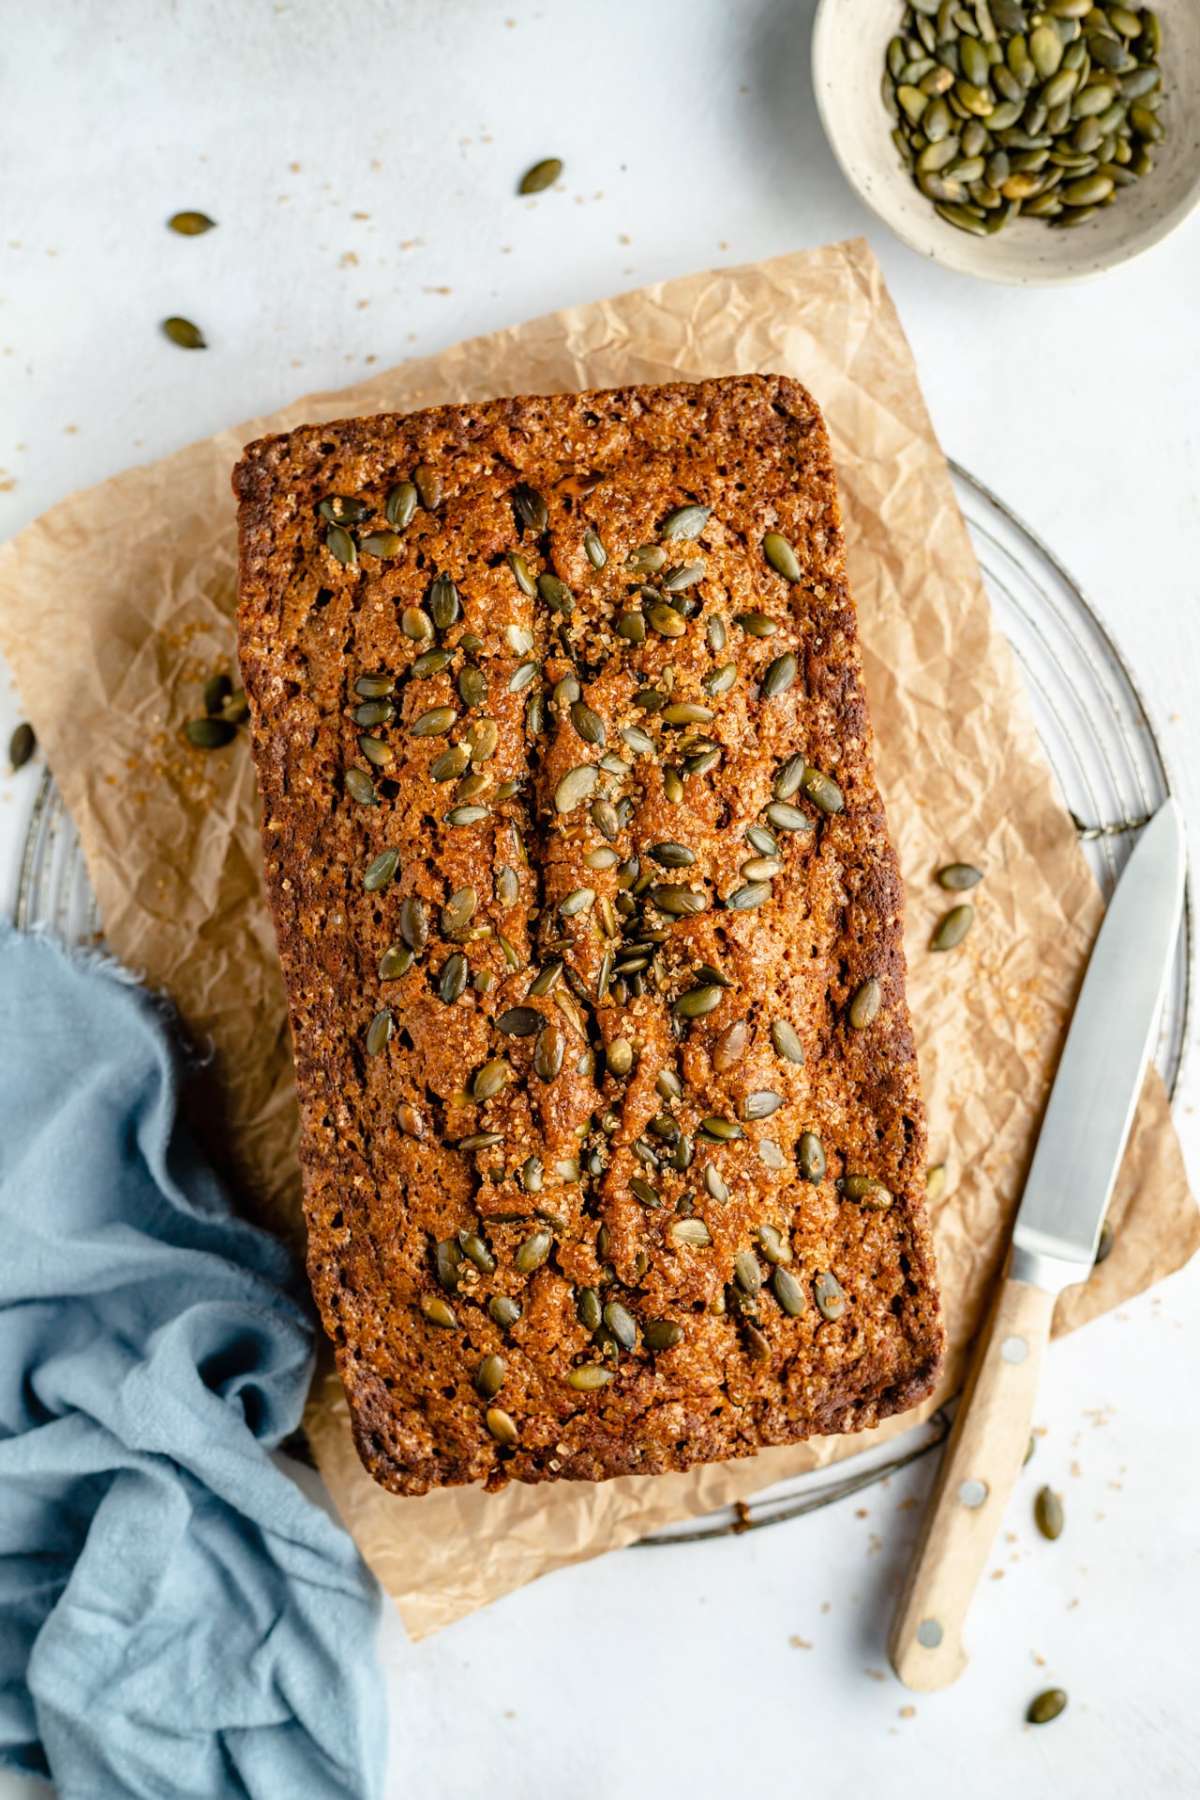 Loaf of pumpkin bread topped with pumpkin seeds.